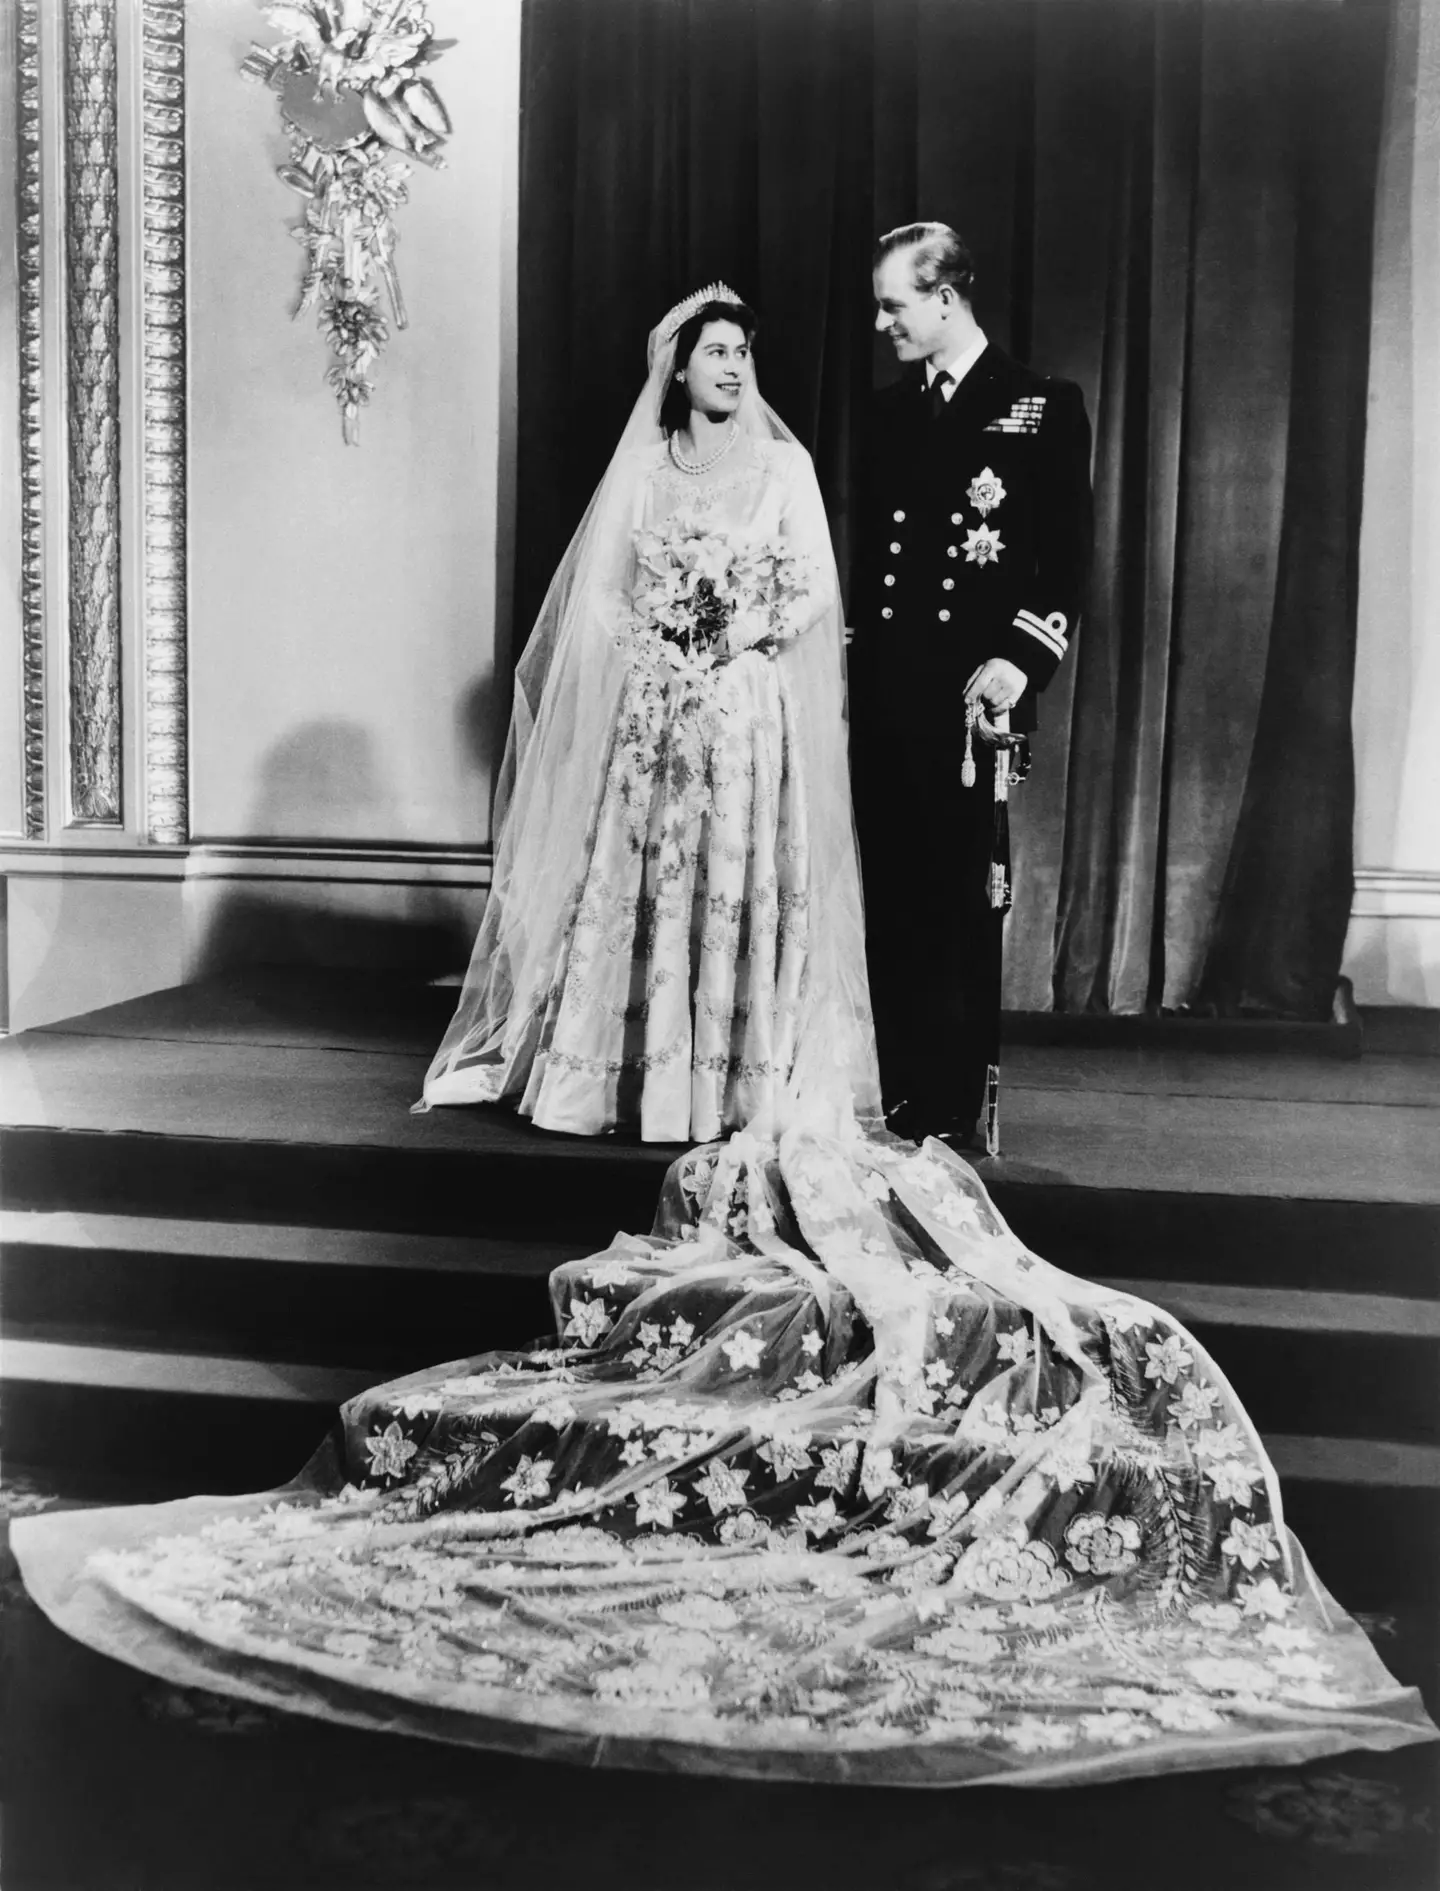 The Queen and Prince Philip married in 1947 and were together until his death in 2021.